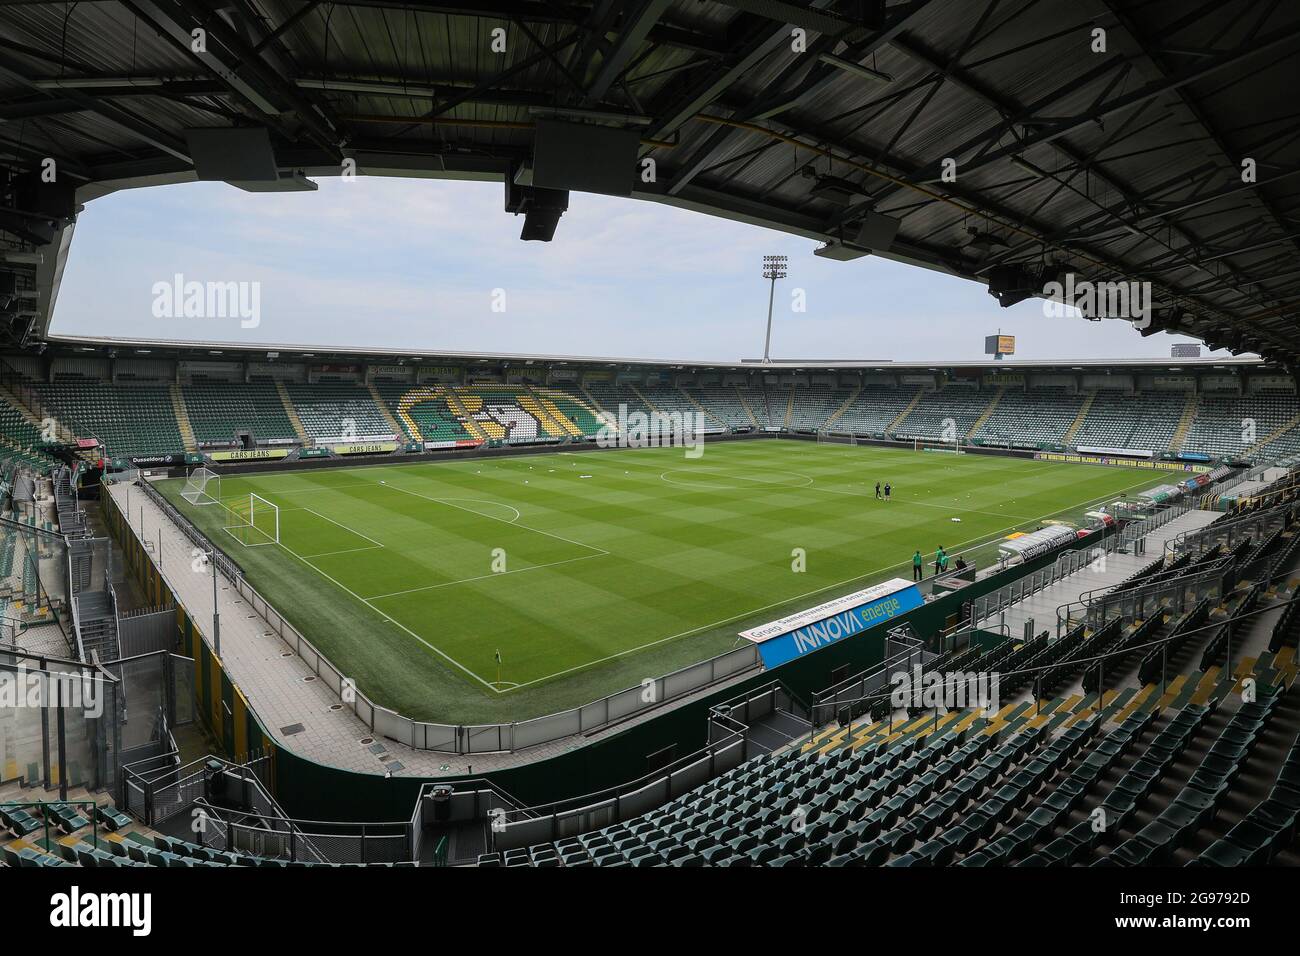 DEN HAAG, NETHERLANDS - JULY 24: during the Pre season friendly match  between ADO Den Haag and FC Twente at Cars Jeans Stadion on July 24, 2021  in Den Haag, Netherlands (Photo